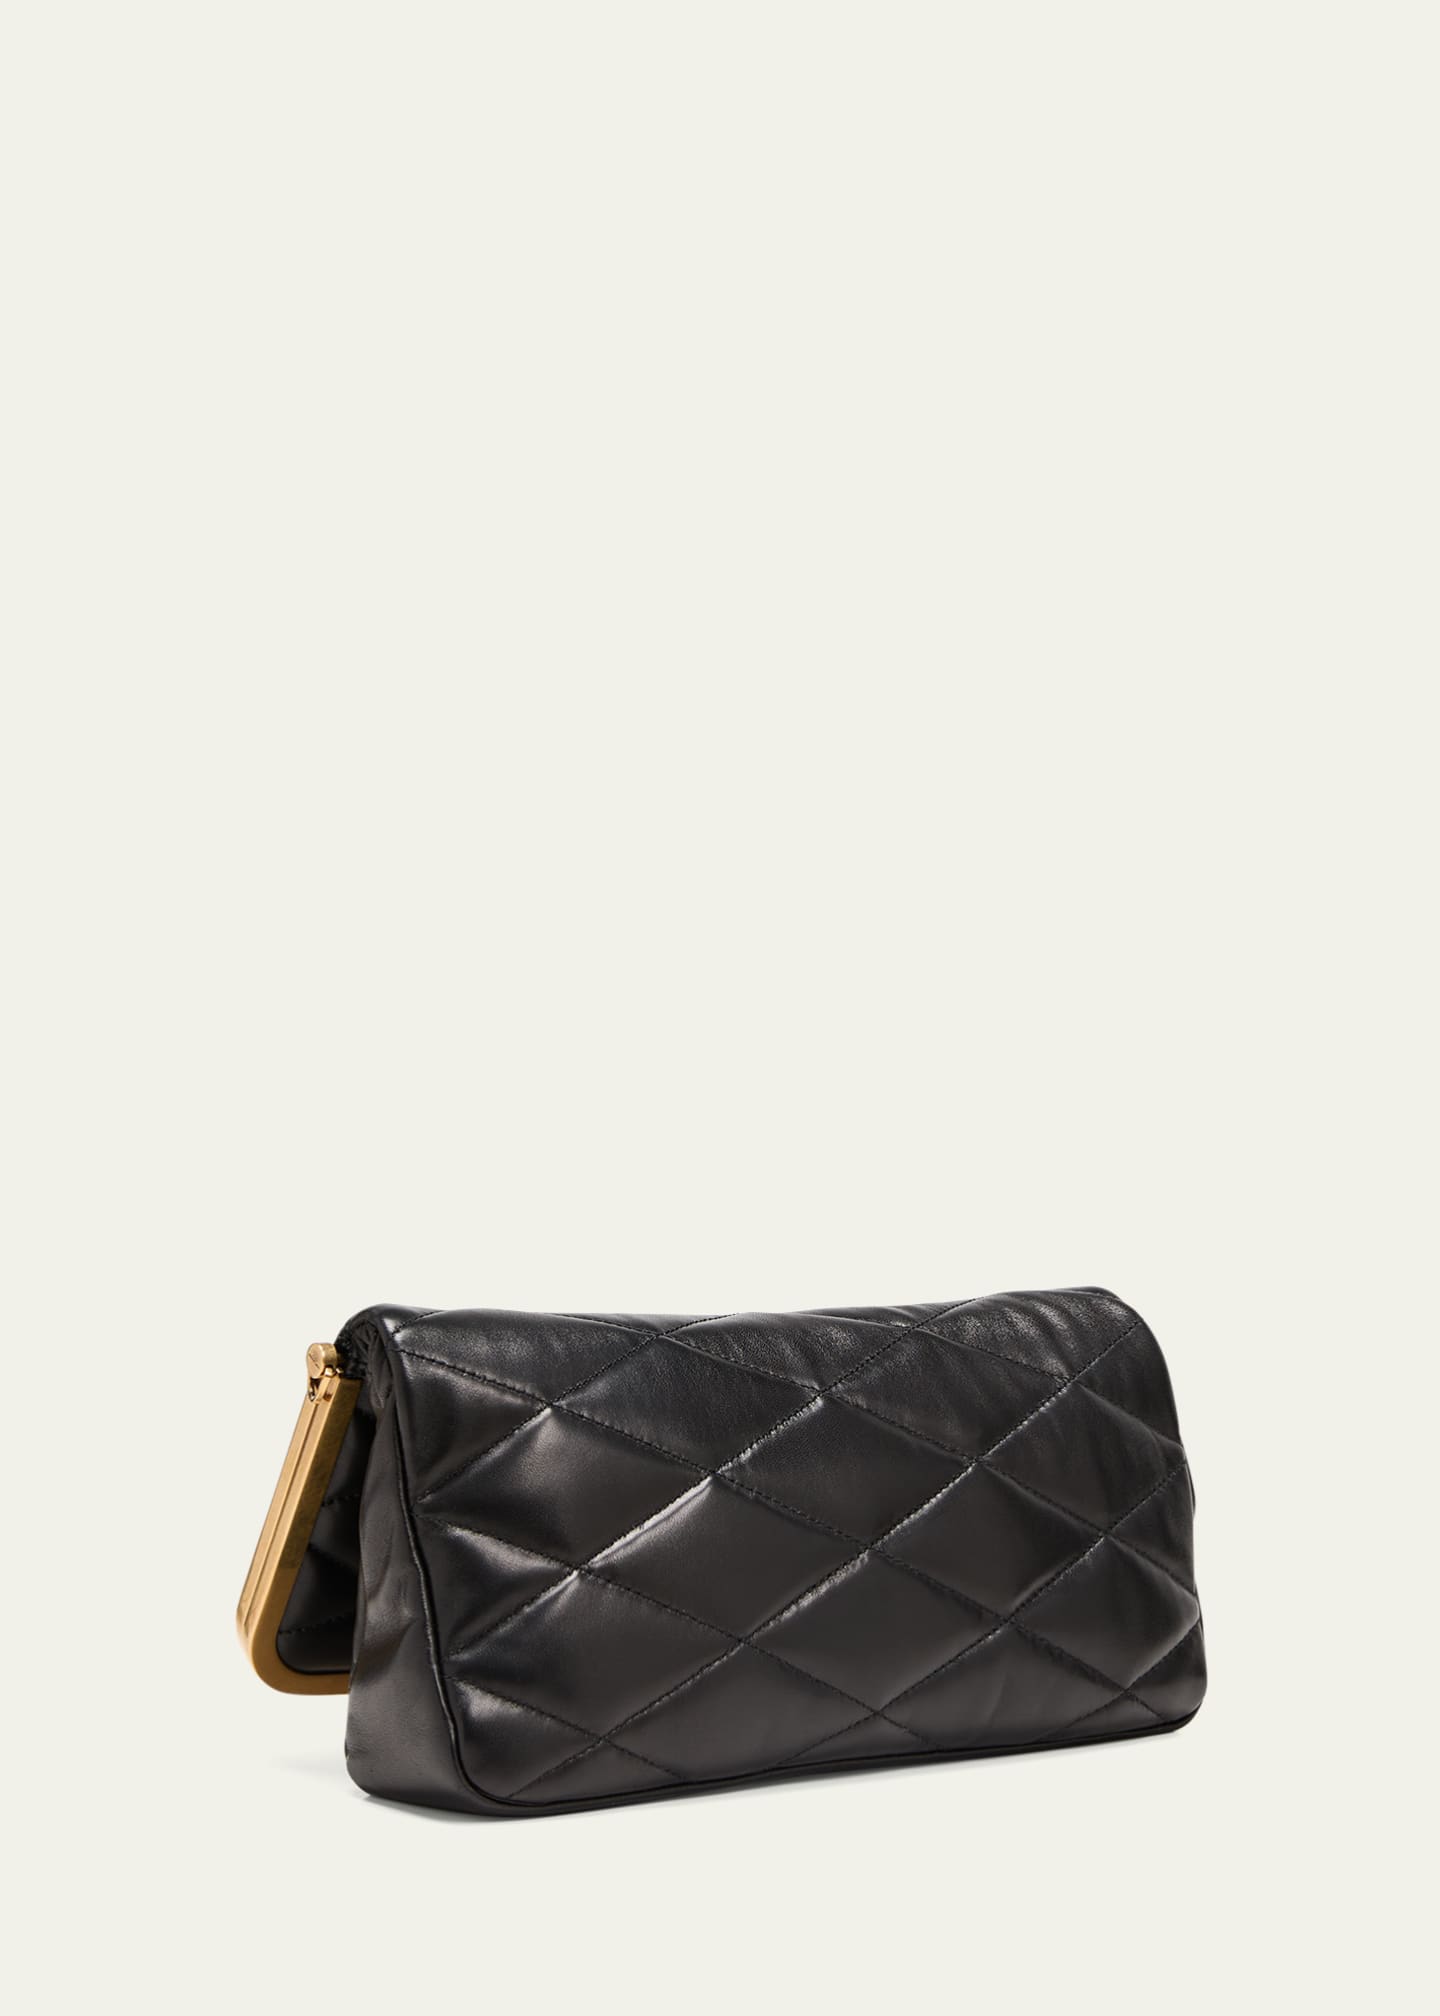 Saint Laurent YSL Quilted Leather Cosmetic Bag - Bergdorf Goodman